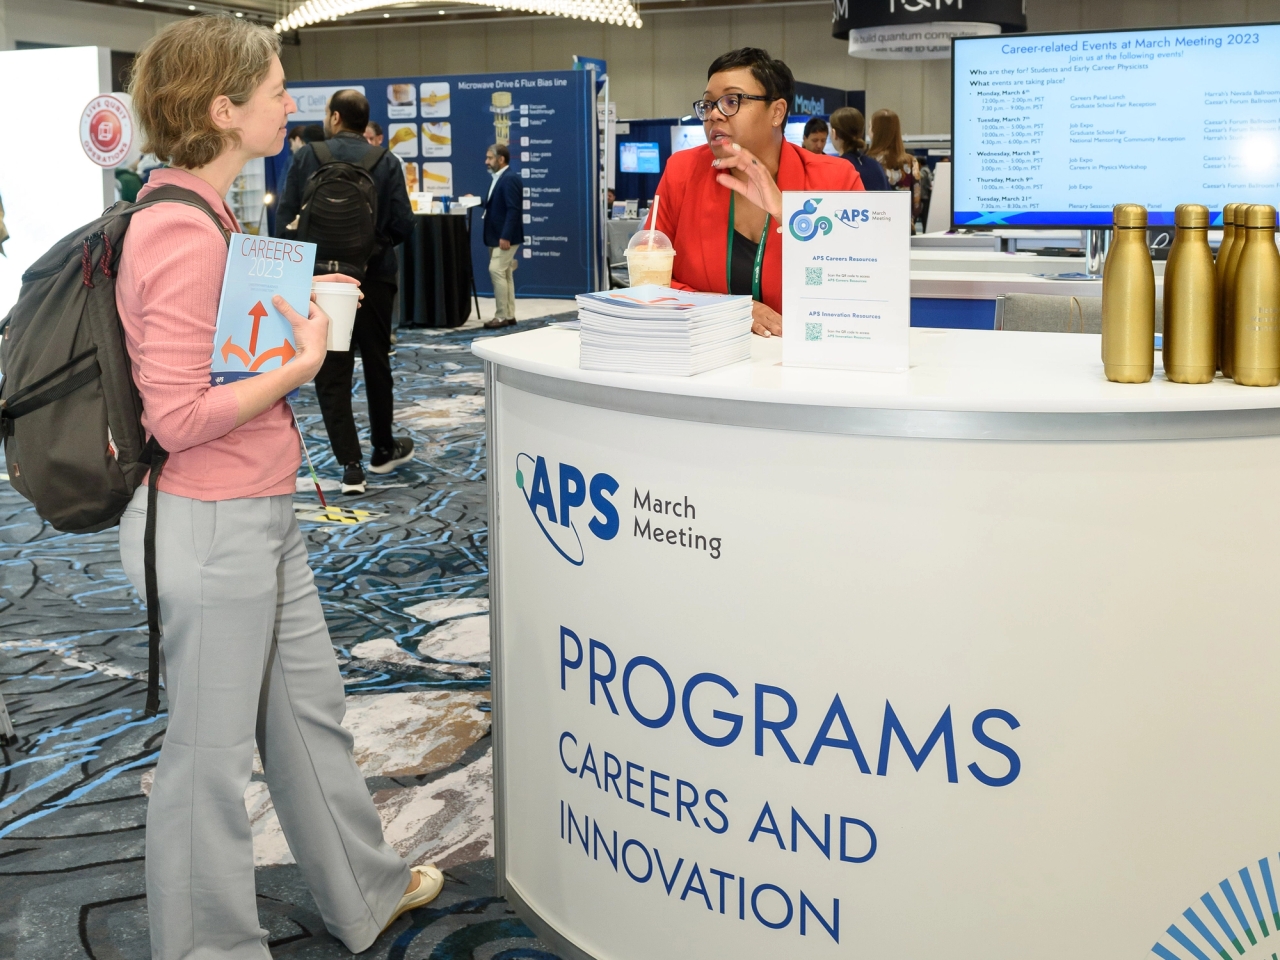 March Meeting attendee in conversation with an APS Programs booth staffer in the exhibit hall